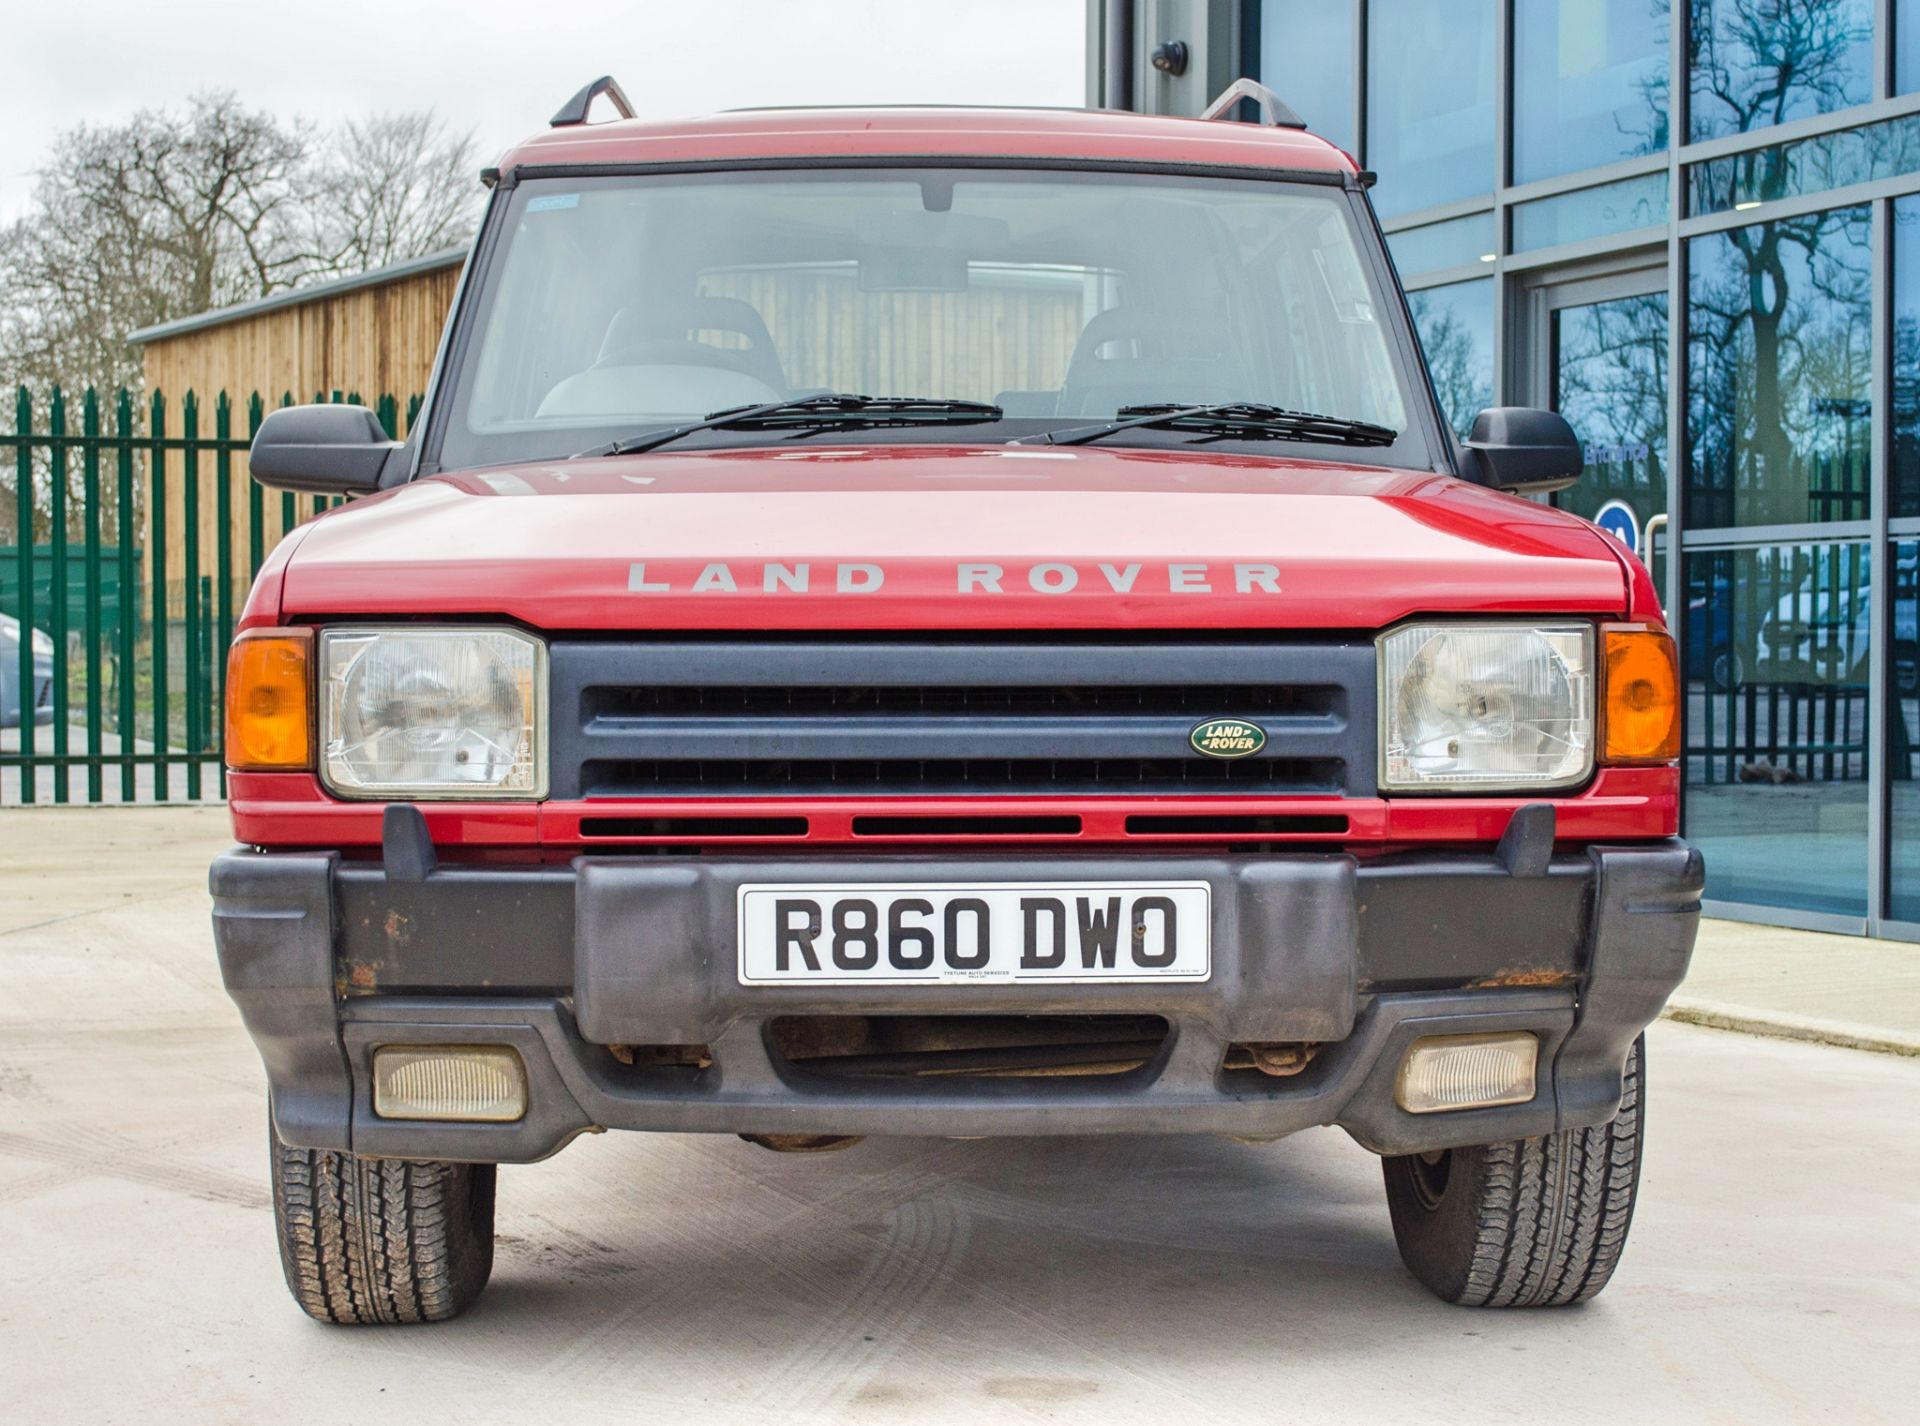 1998 Landrover Discovery 3.9 litre V8 manual 5 door 4wd - Image 9 of 46